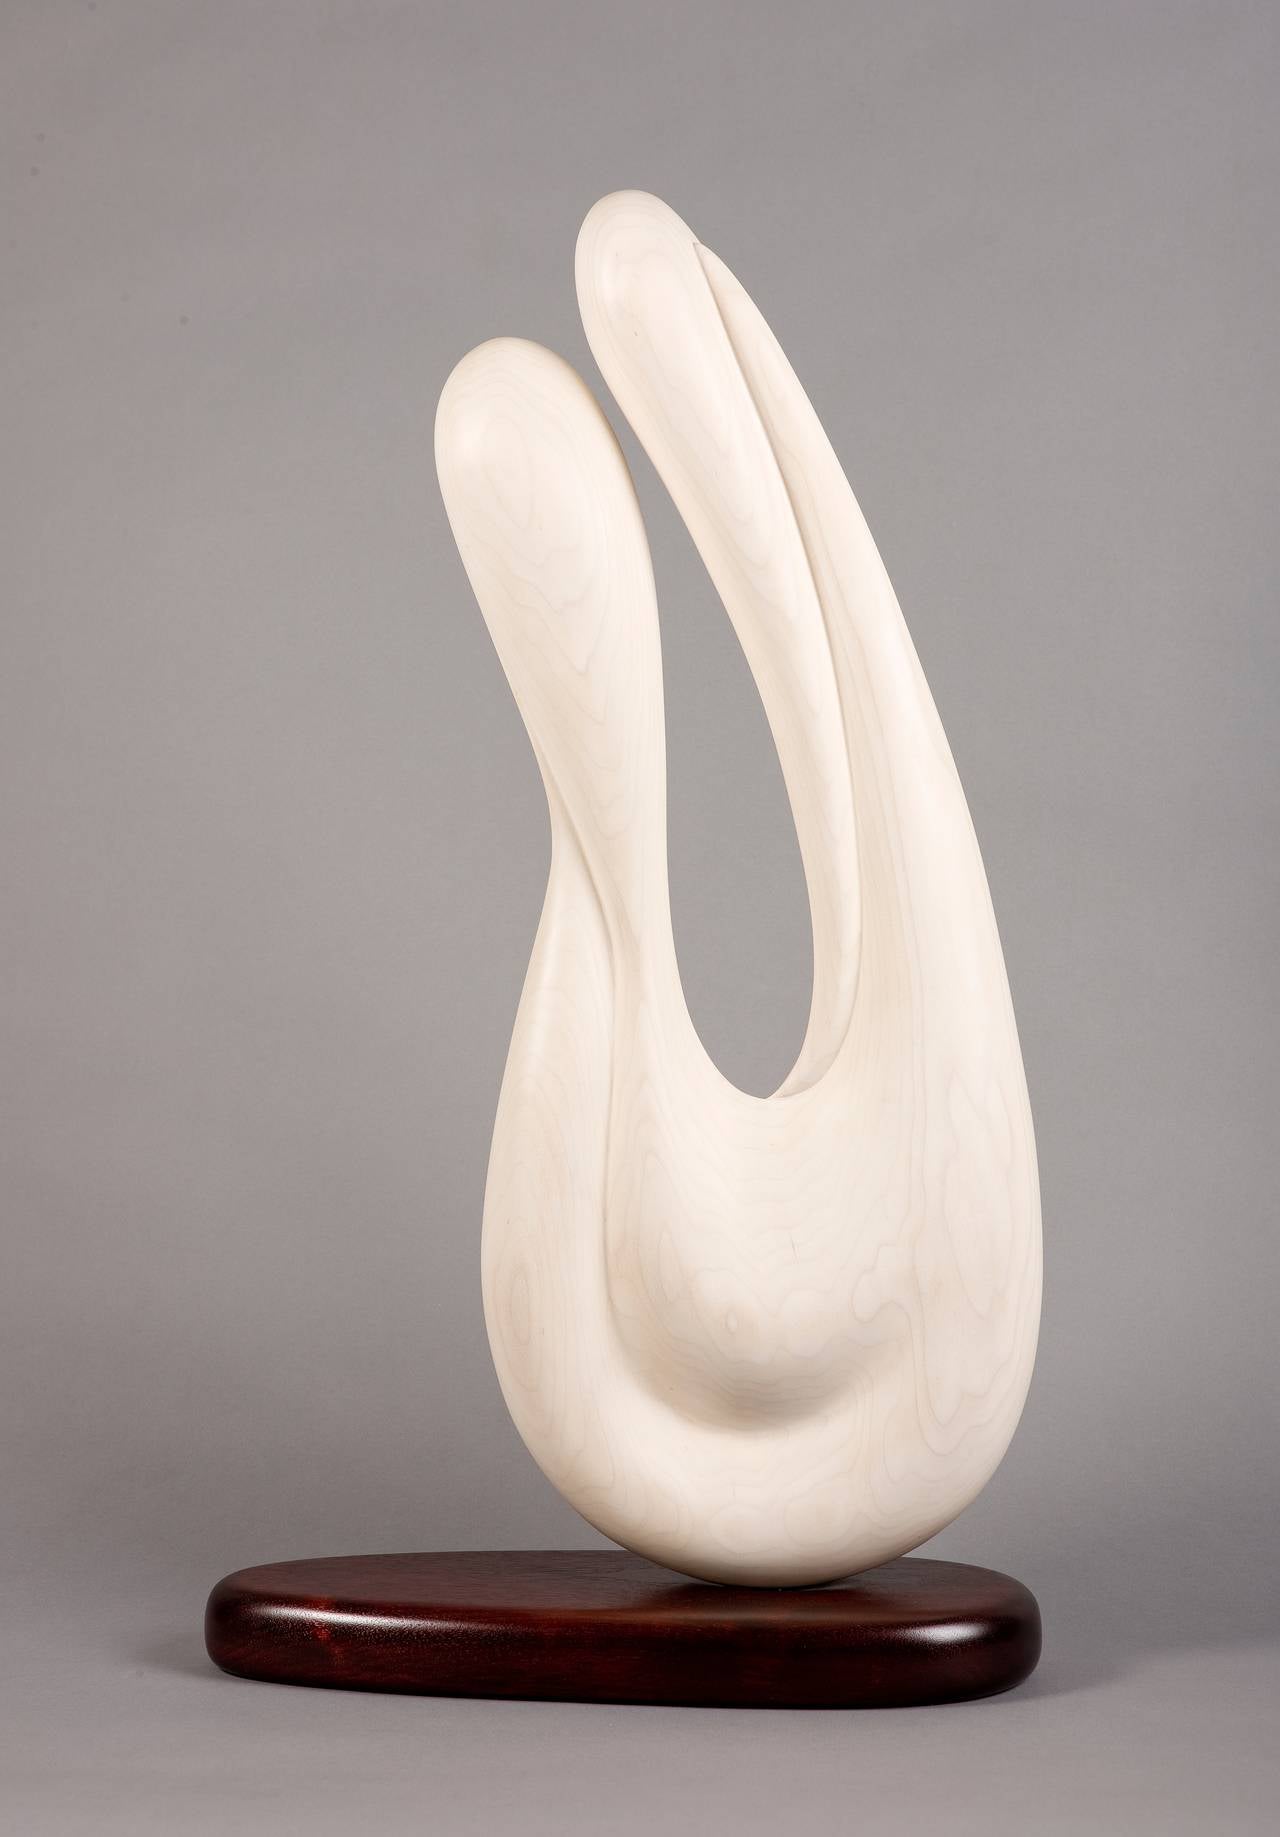 Circa 2005, this wood sculpture by Betty Scarpino demonstrates her extraordinary acumen as both a woodworker and artist. 

Contemporary artist, sculptor and woodturner Betty Scarpino is recognized as one of the masters of the genre. Her work is